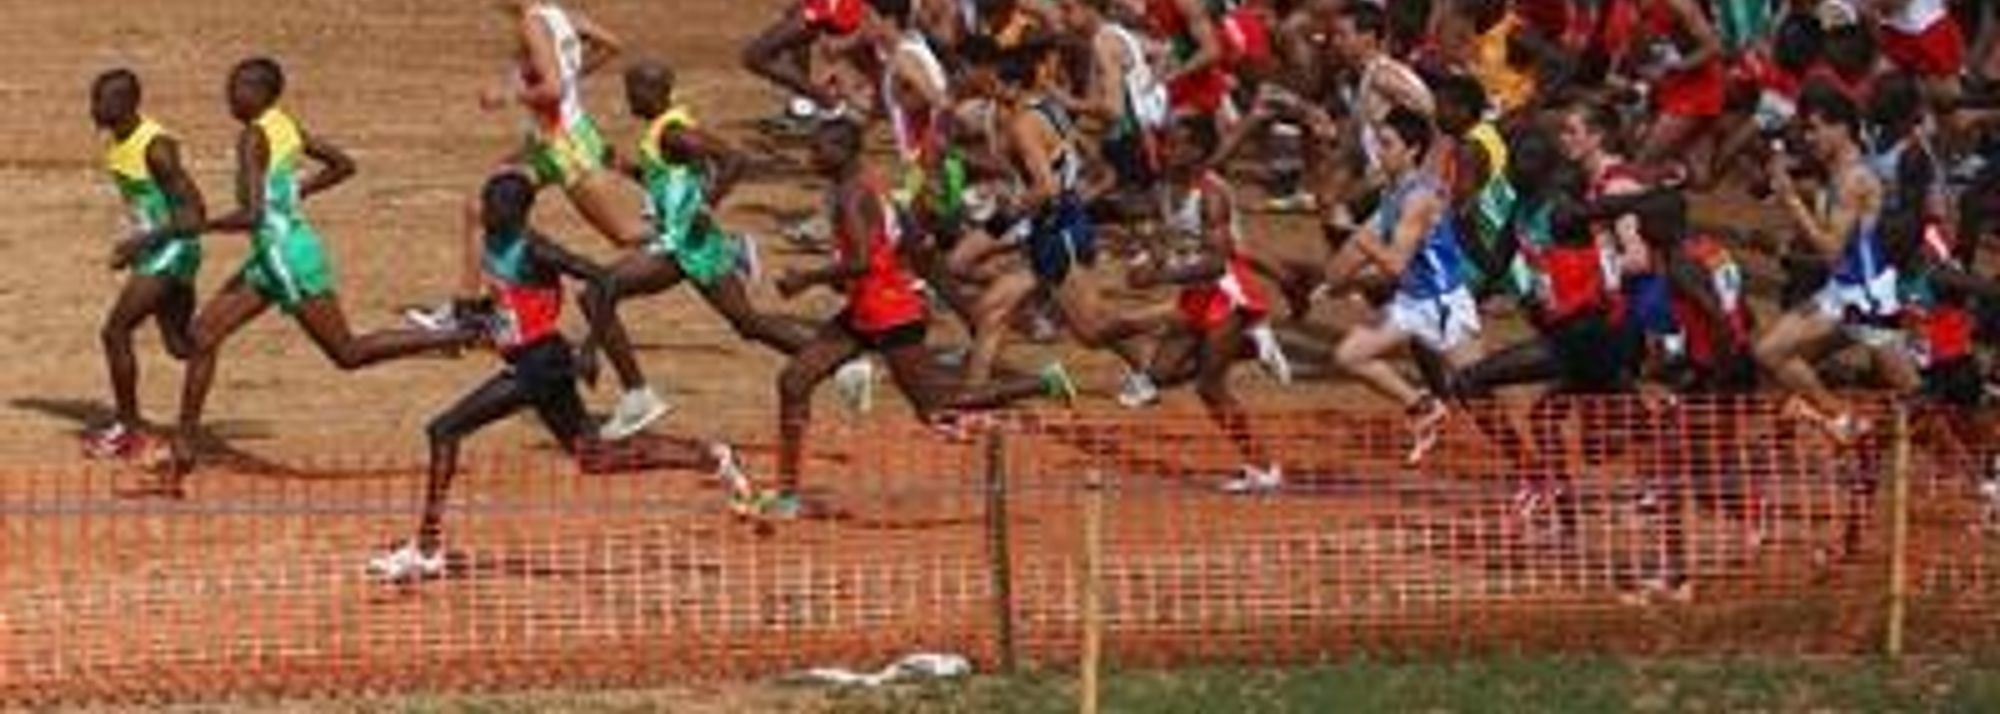 - Last October when launching their promotion of 37th IAAF World Cross Country Championships, the patron of the Local Organising Committee, His Royal Highness Prince Feisal Al Hussein, stated that by hosting the championships he hoped to further enhance the position of the Kingdom as a leading sporting and leisure destination.</P>